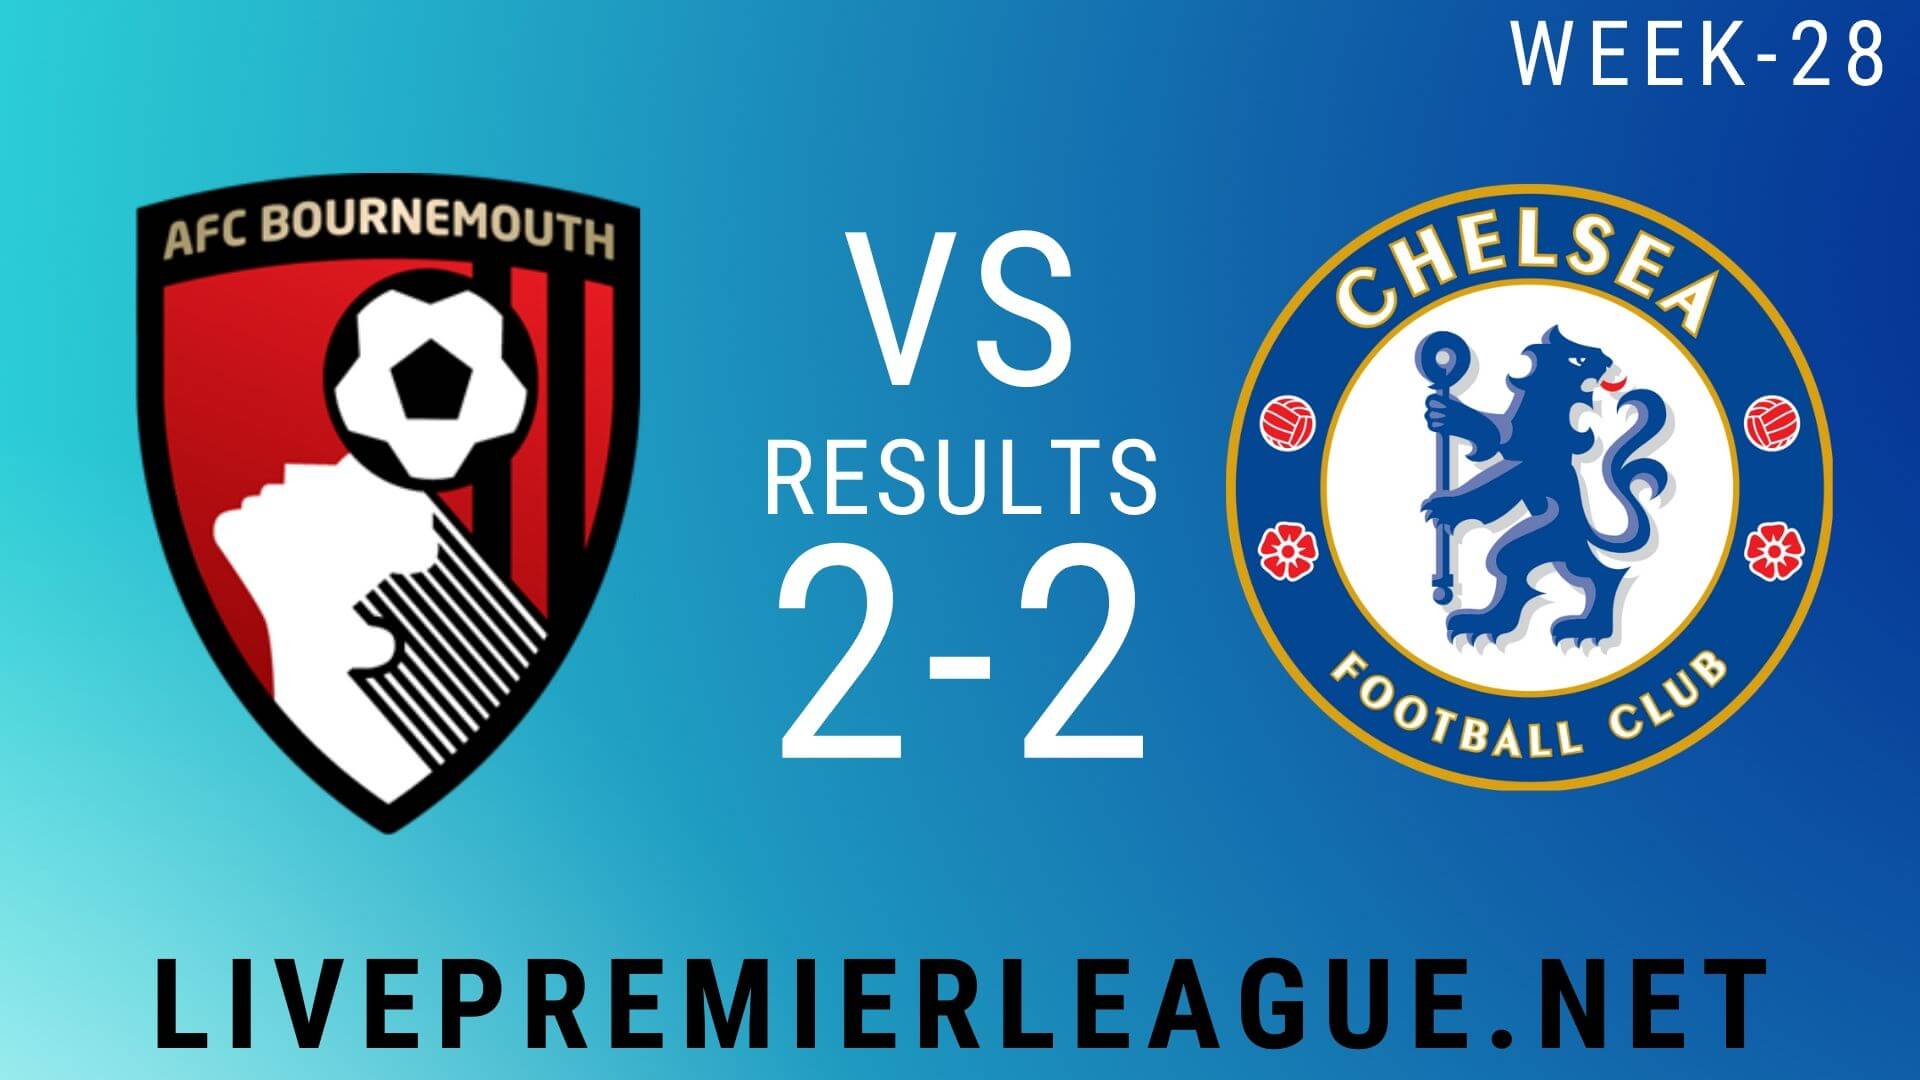 AFC Bournemouth Vs Chelsea | Week 28 Result 2020